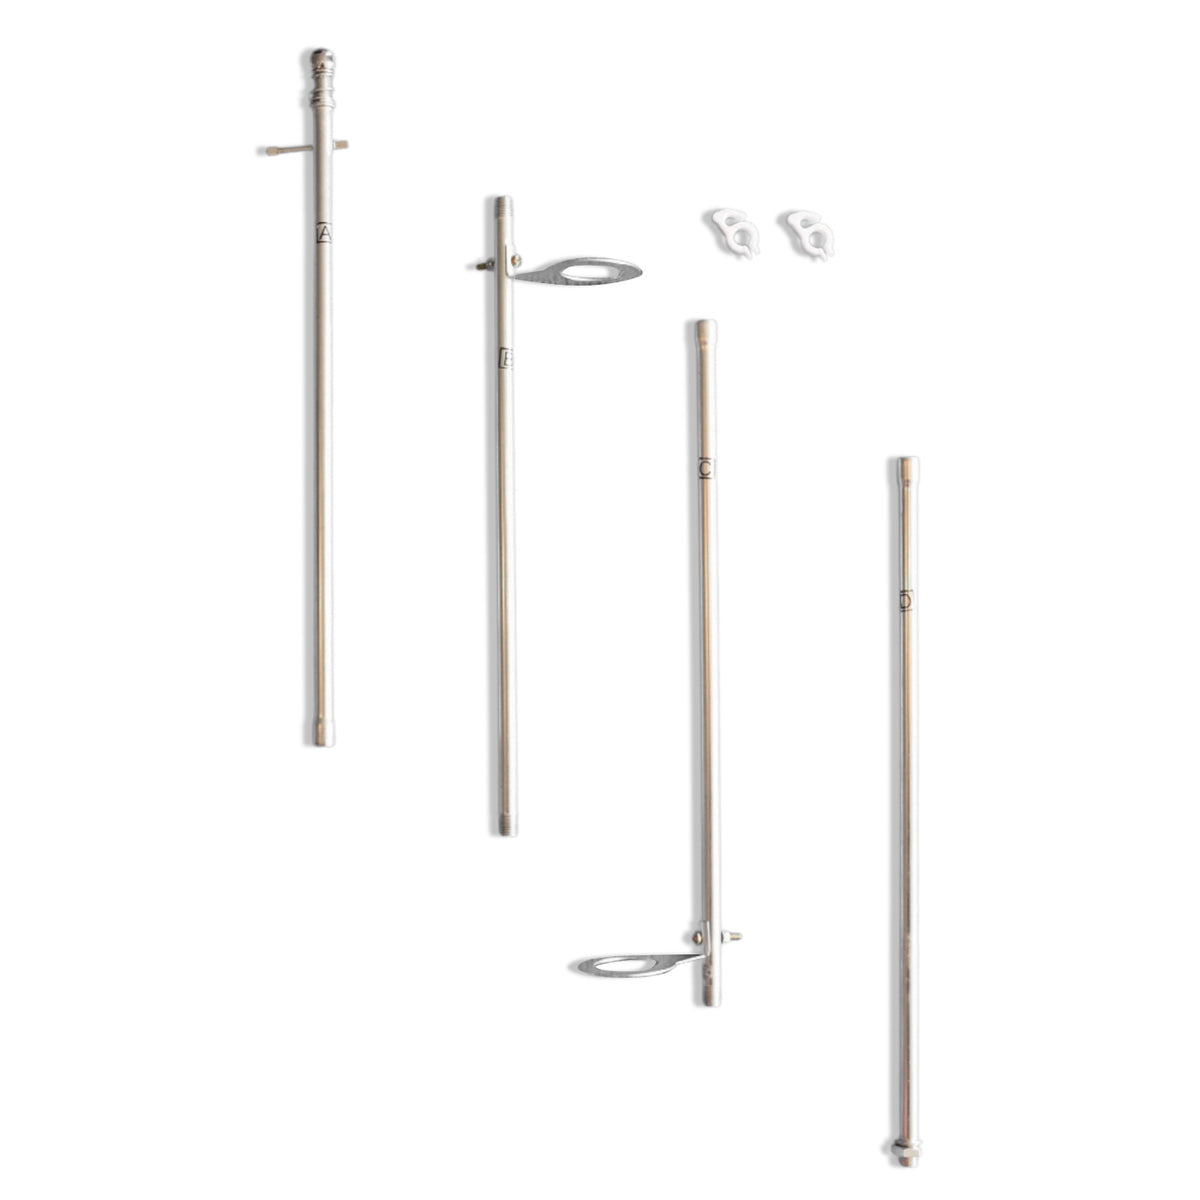 2-Socket Standing Floor Lamp Frame with Instructions, 48-inch (Frame Only)